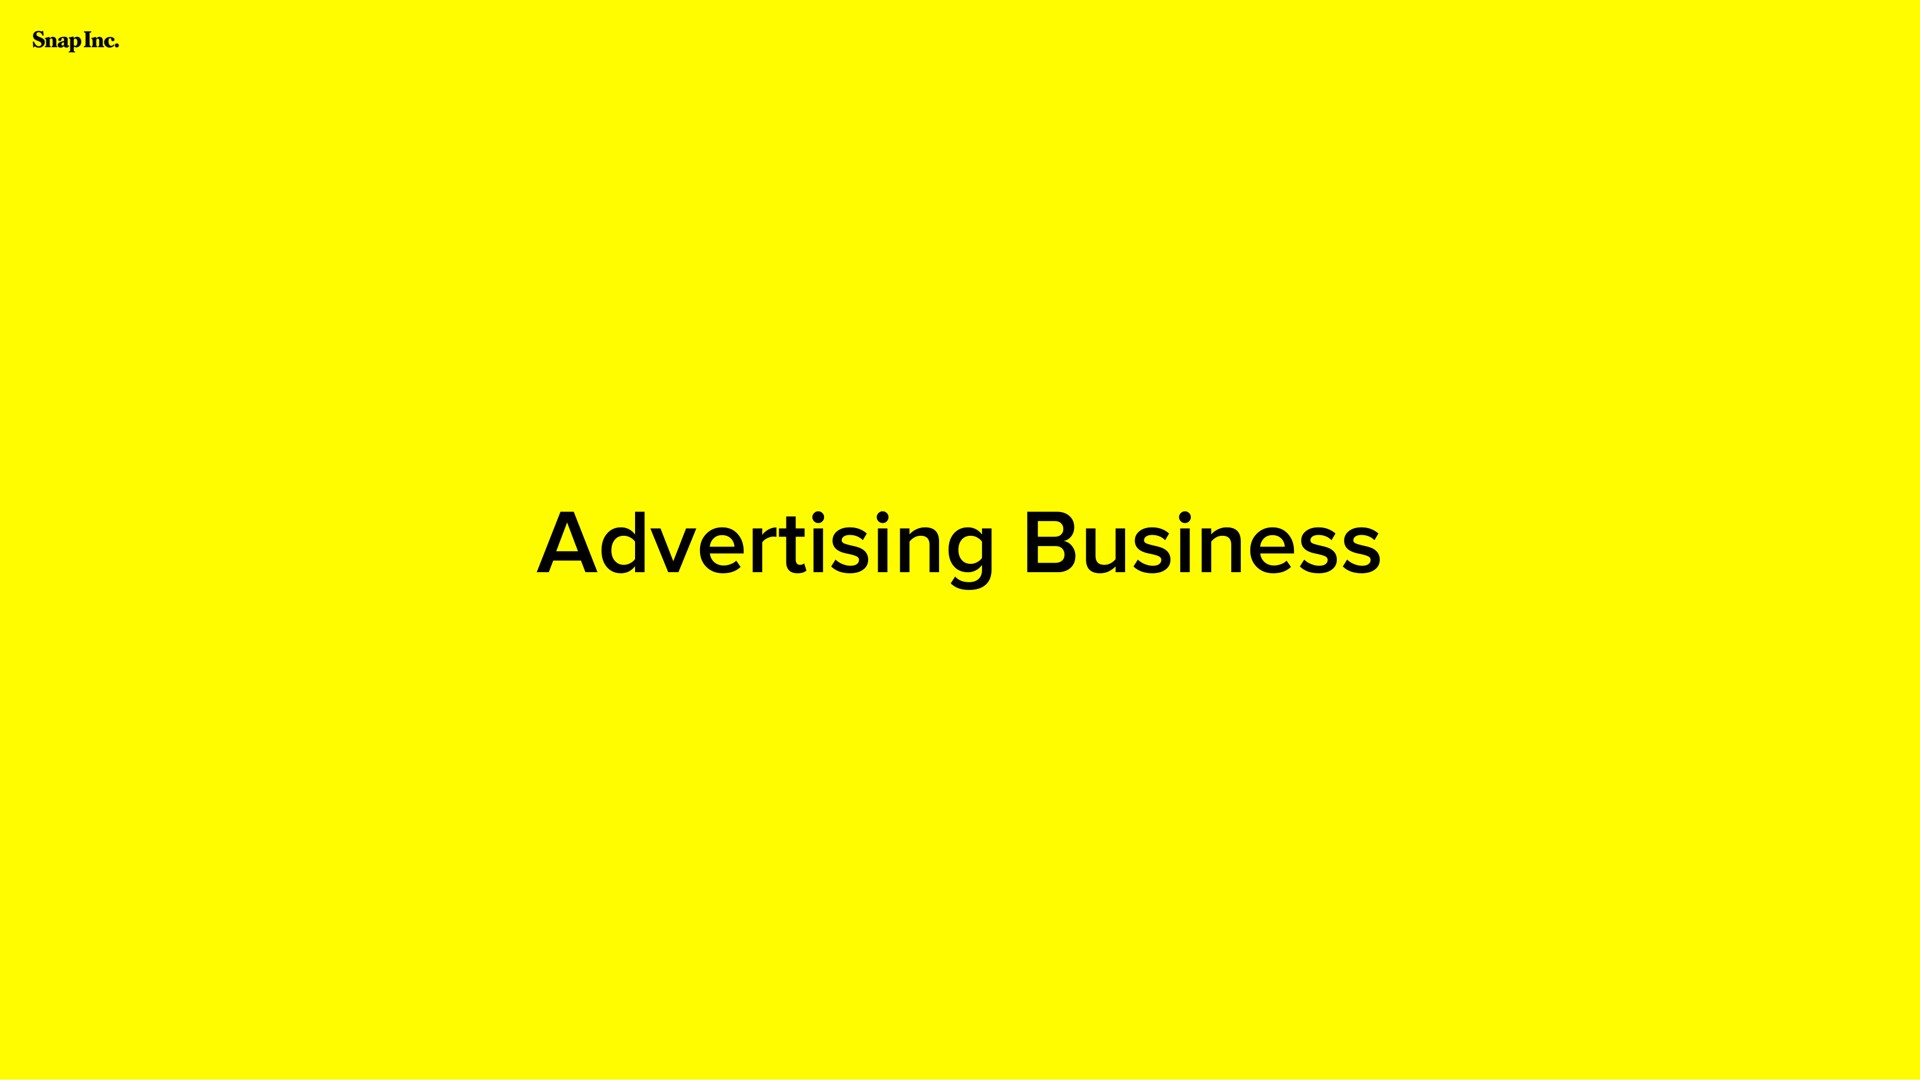 advertising business | Snap Inc